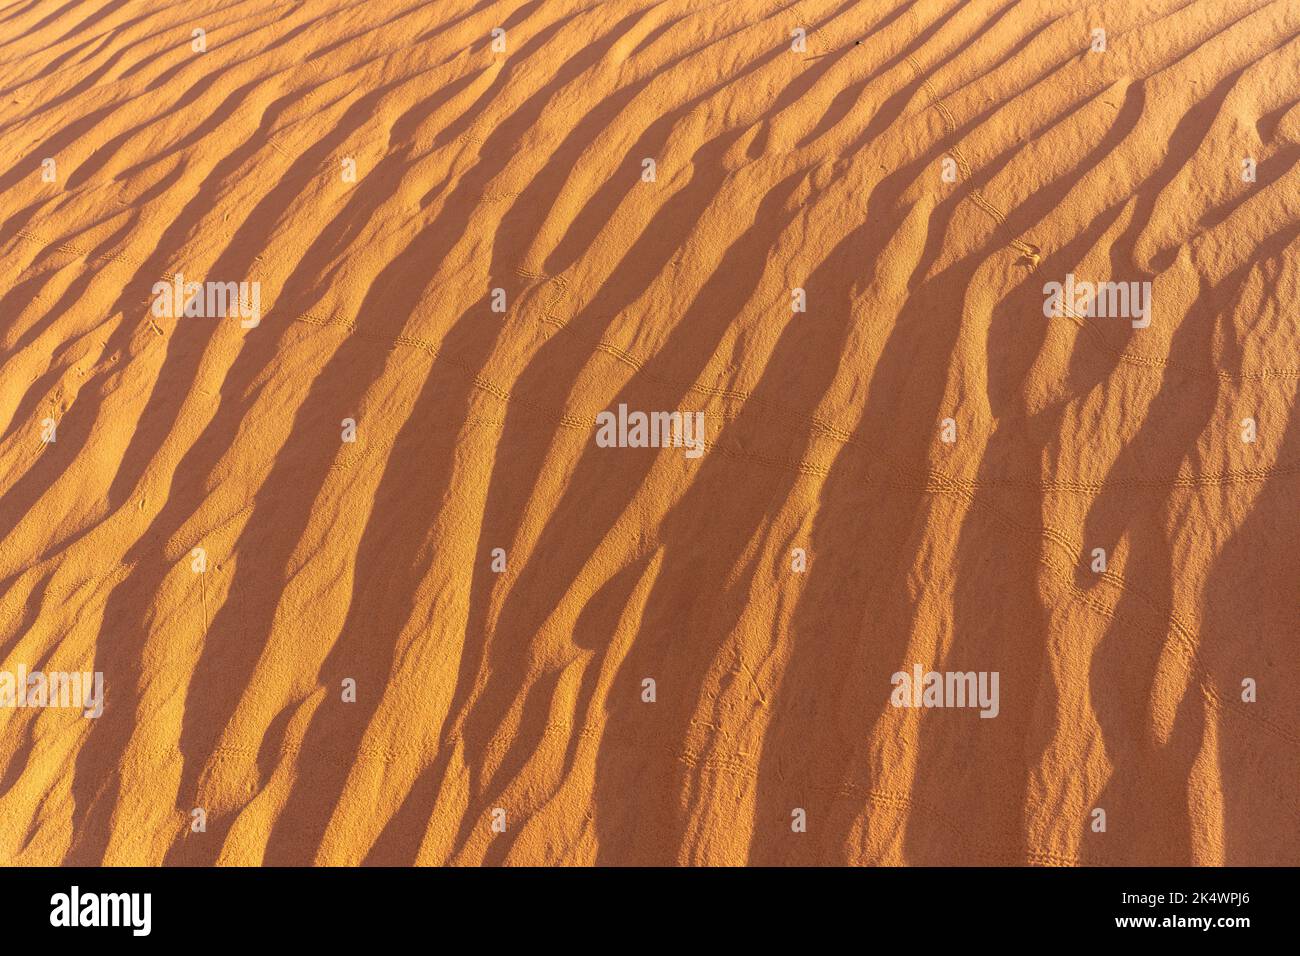 Ripple patterns in the sand dunes at the White Wash Dunes Recreation Area near Moab, Utah. Stock Photo